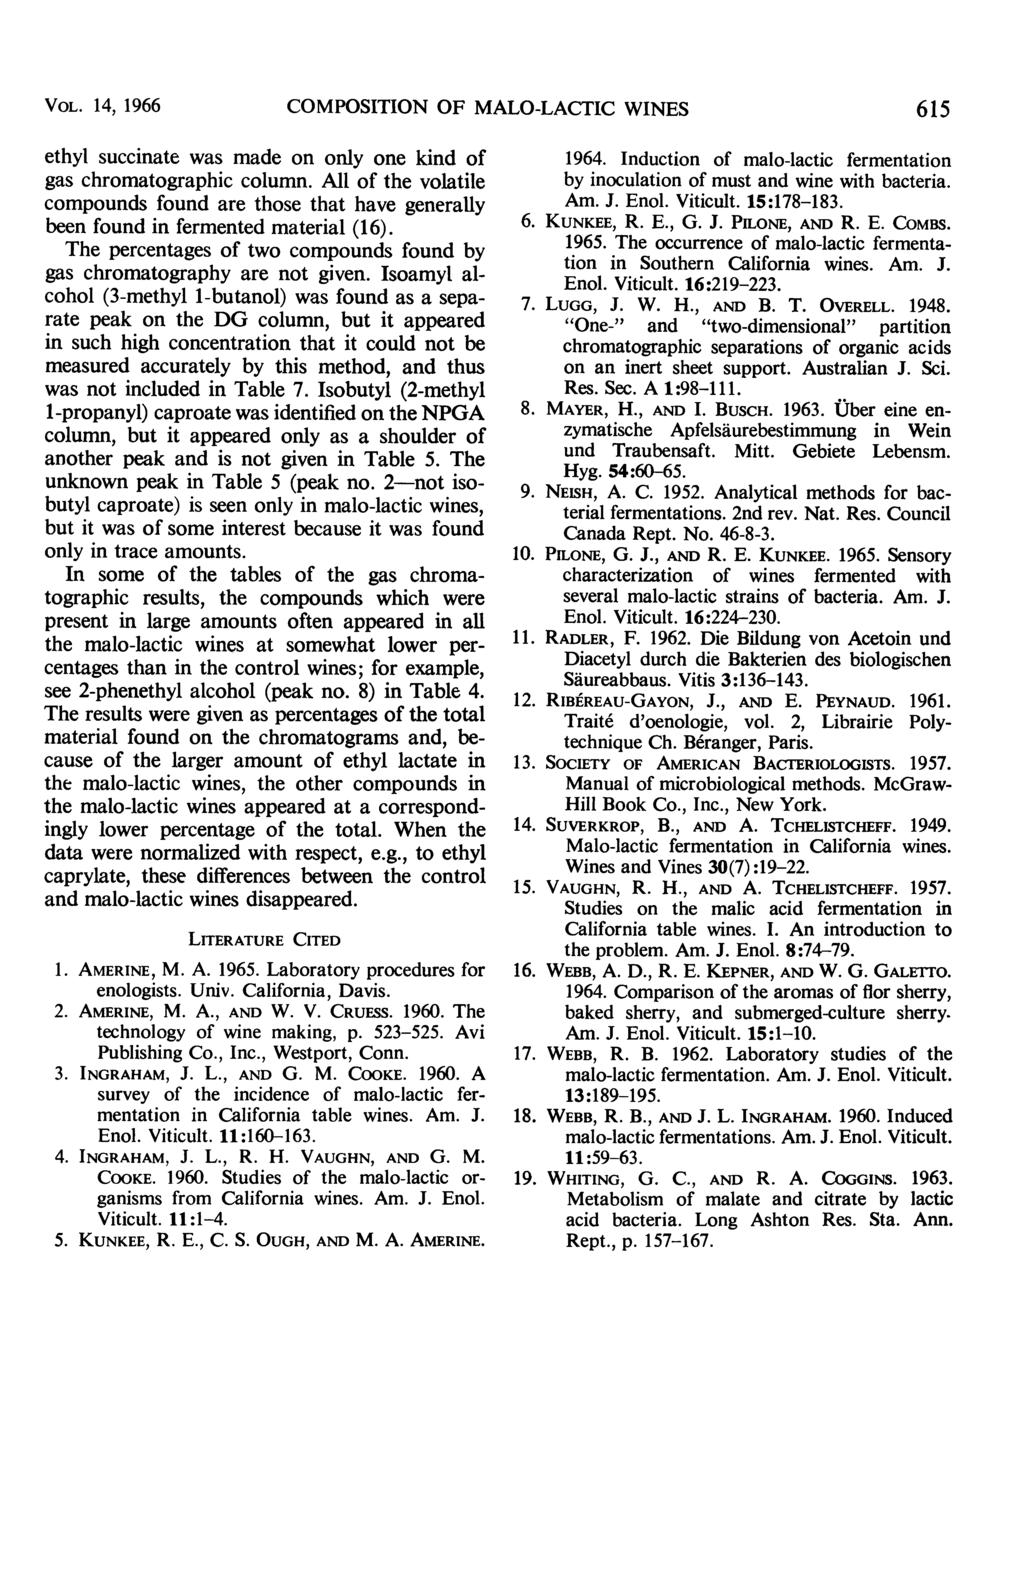 VOL. 14, 1966 COMPOSITION OF MALO-LACTIC WINES 615 ethyl succinte ws mde on only one kind of gs chromtogrphic column.